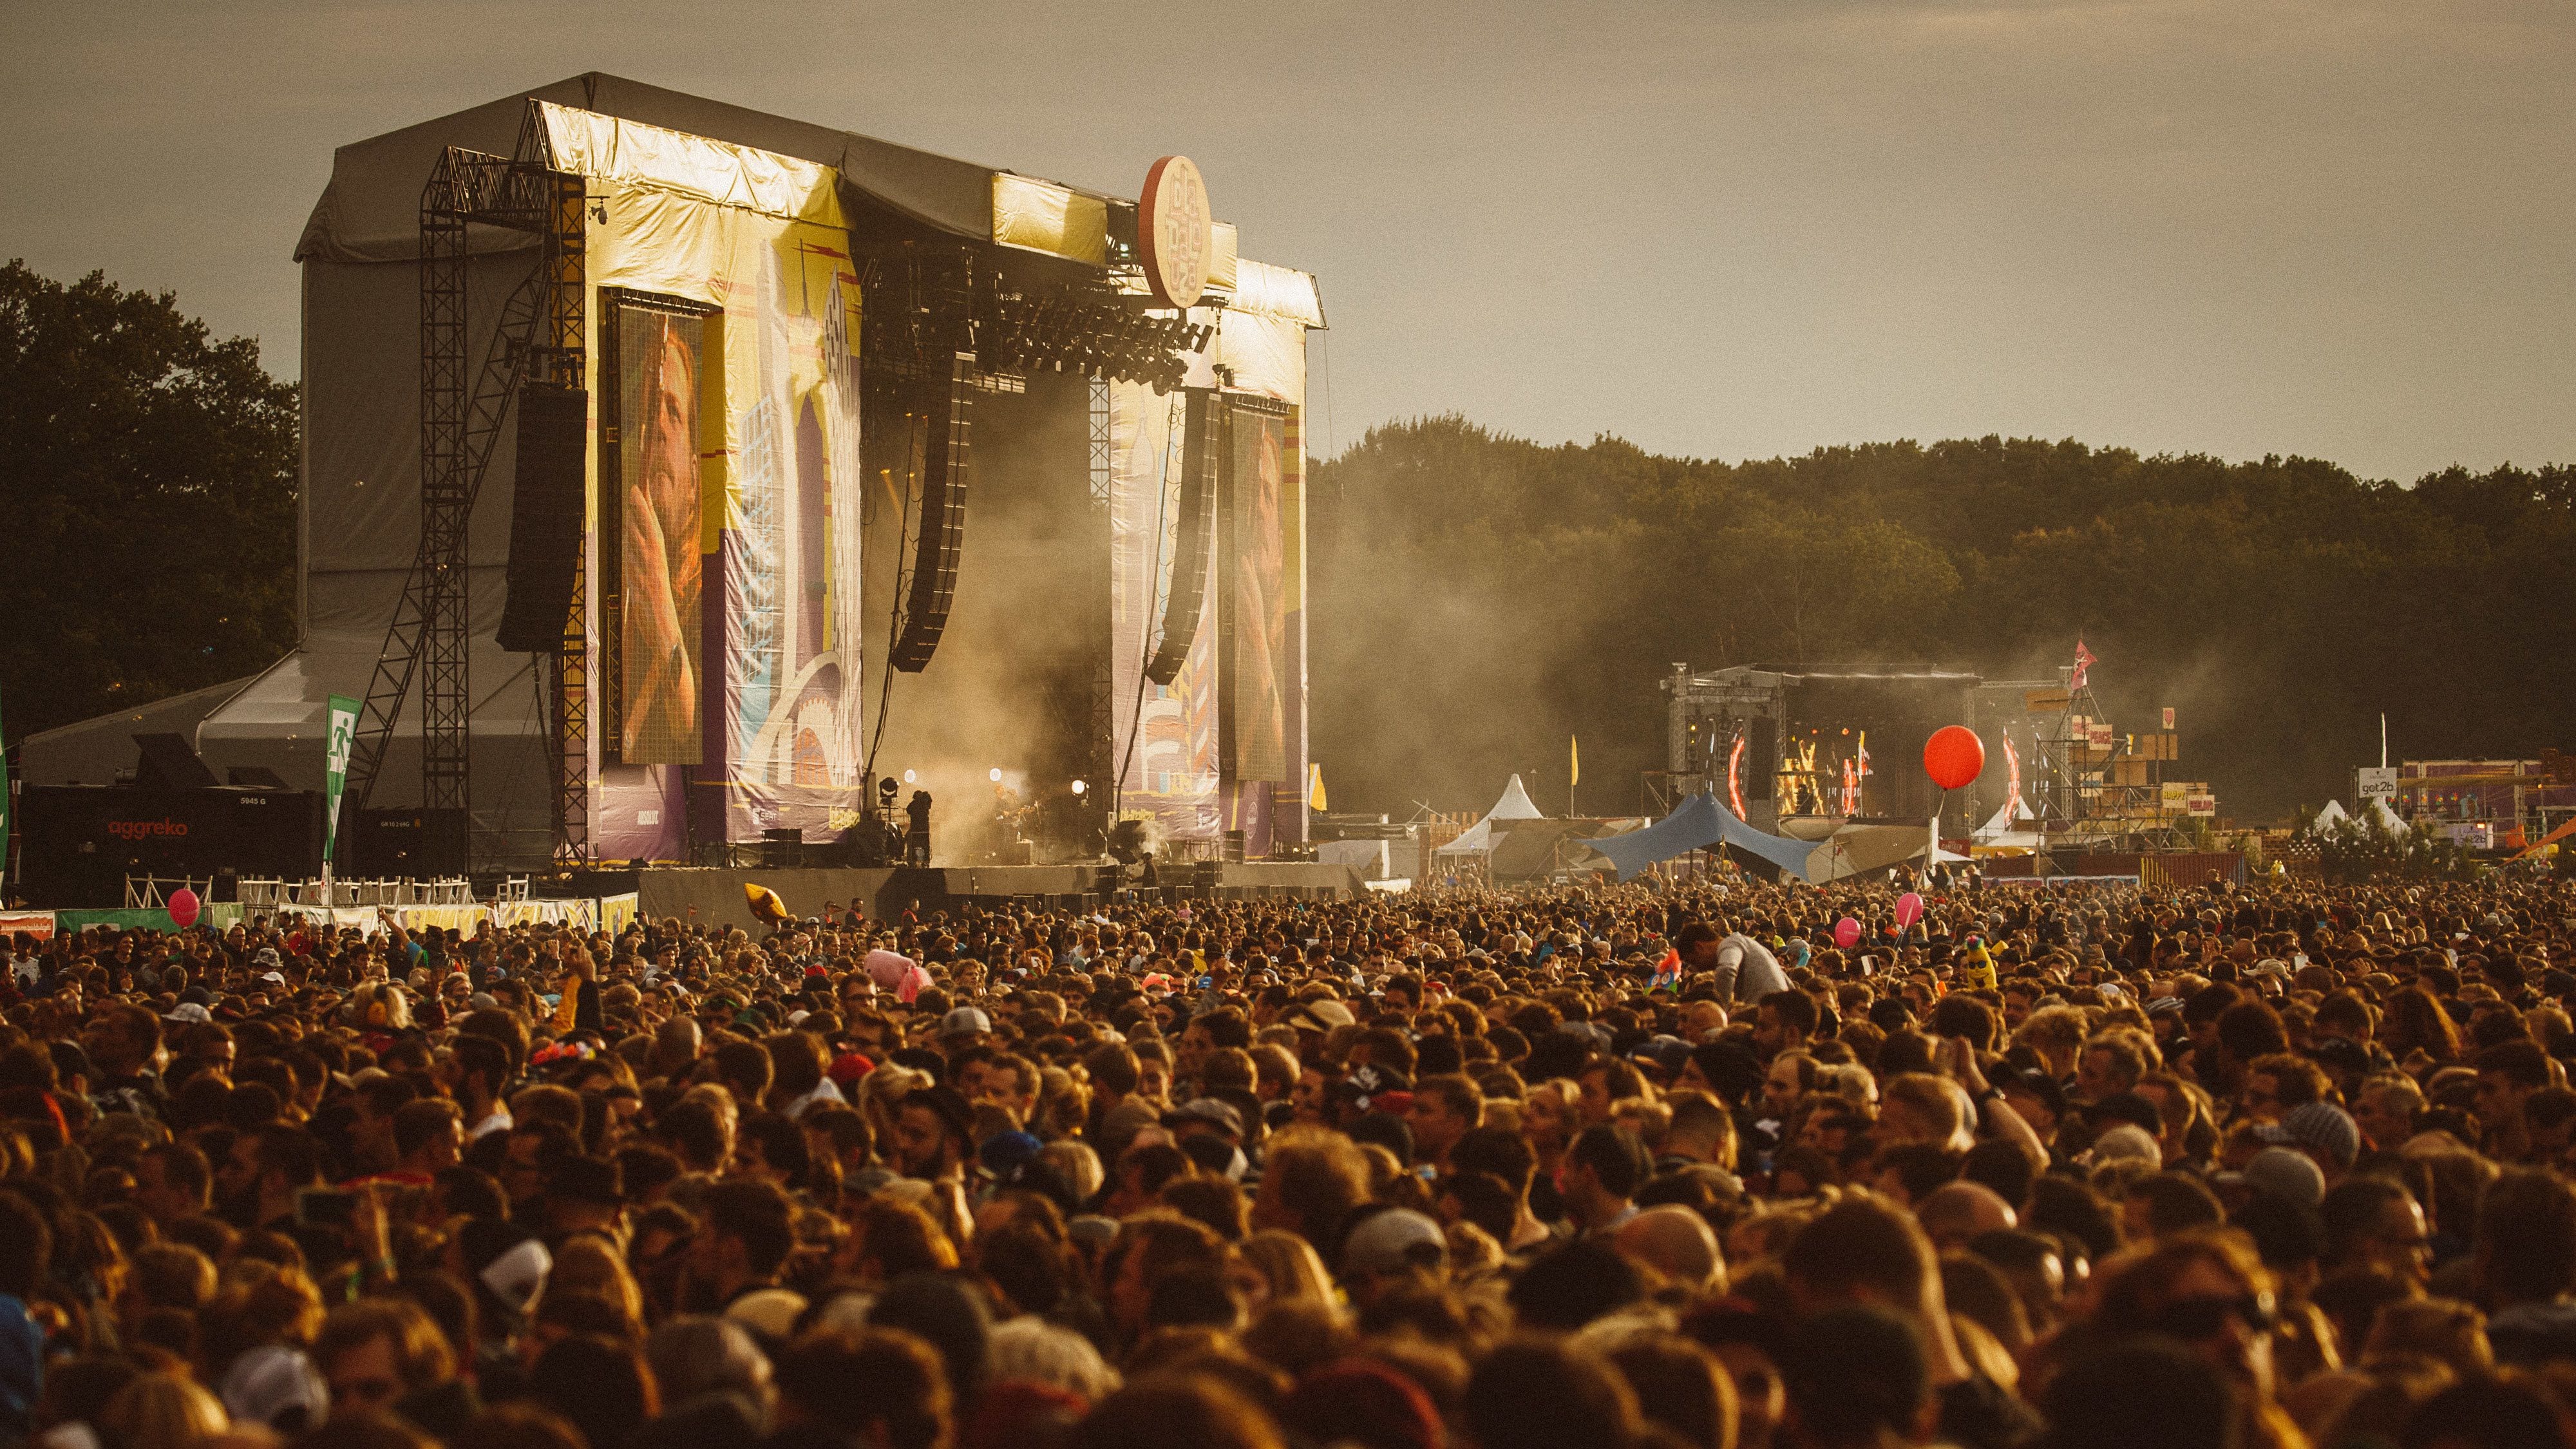 Lollapalooza Berlin Is Ready for the Big Leagues